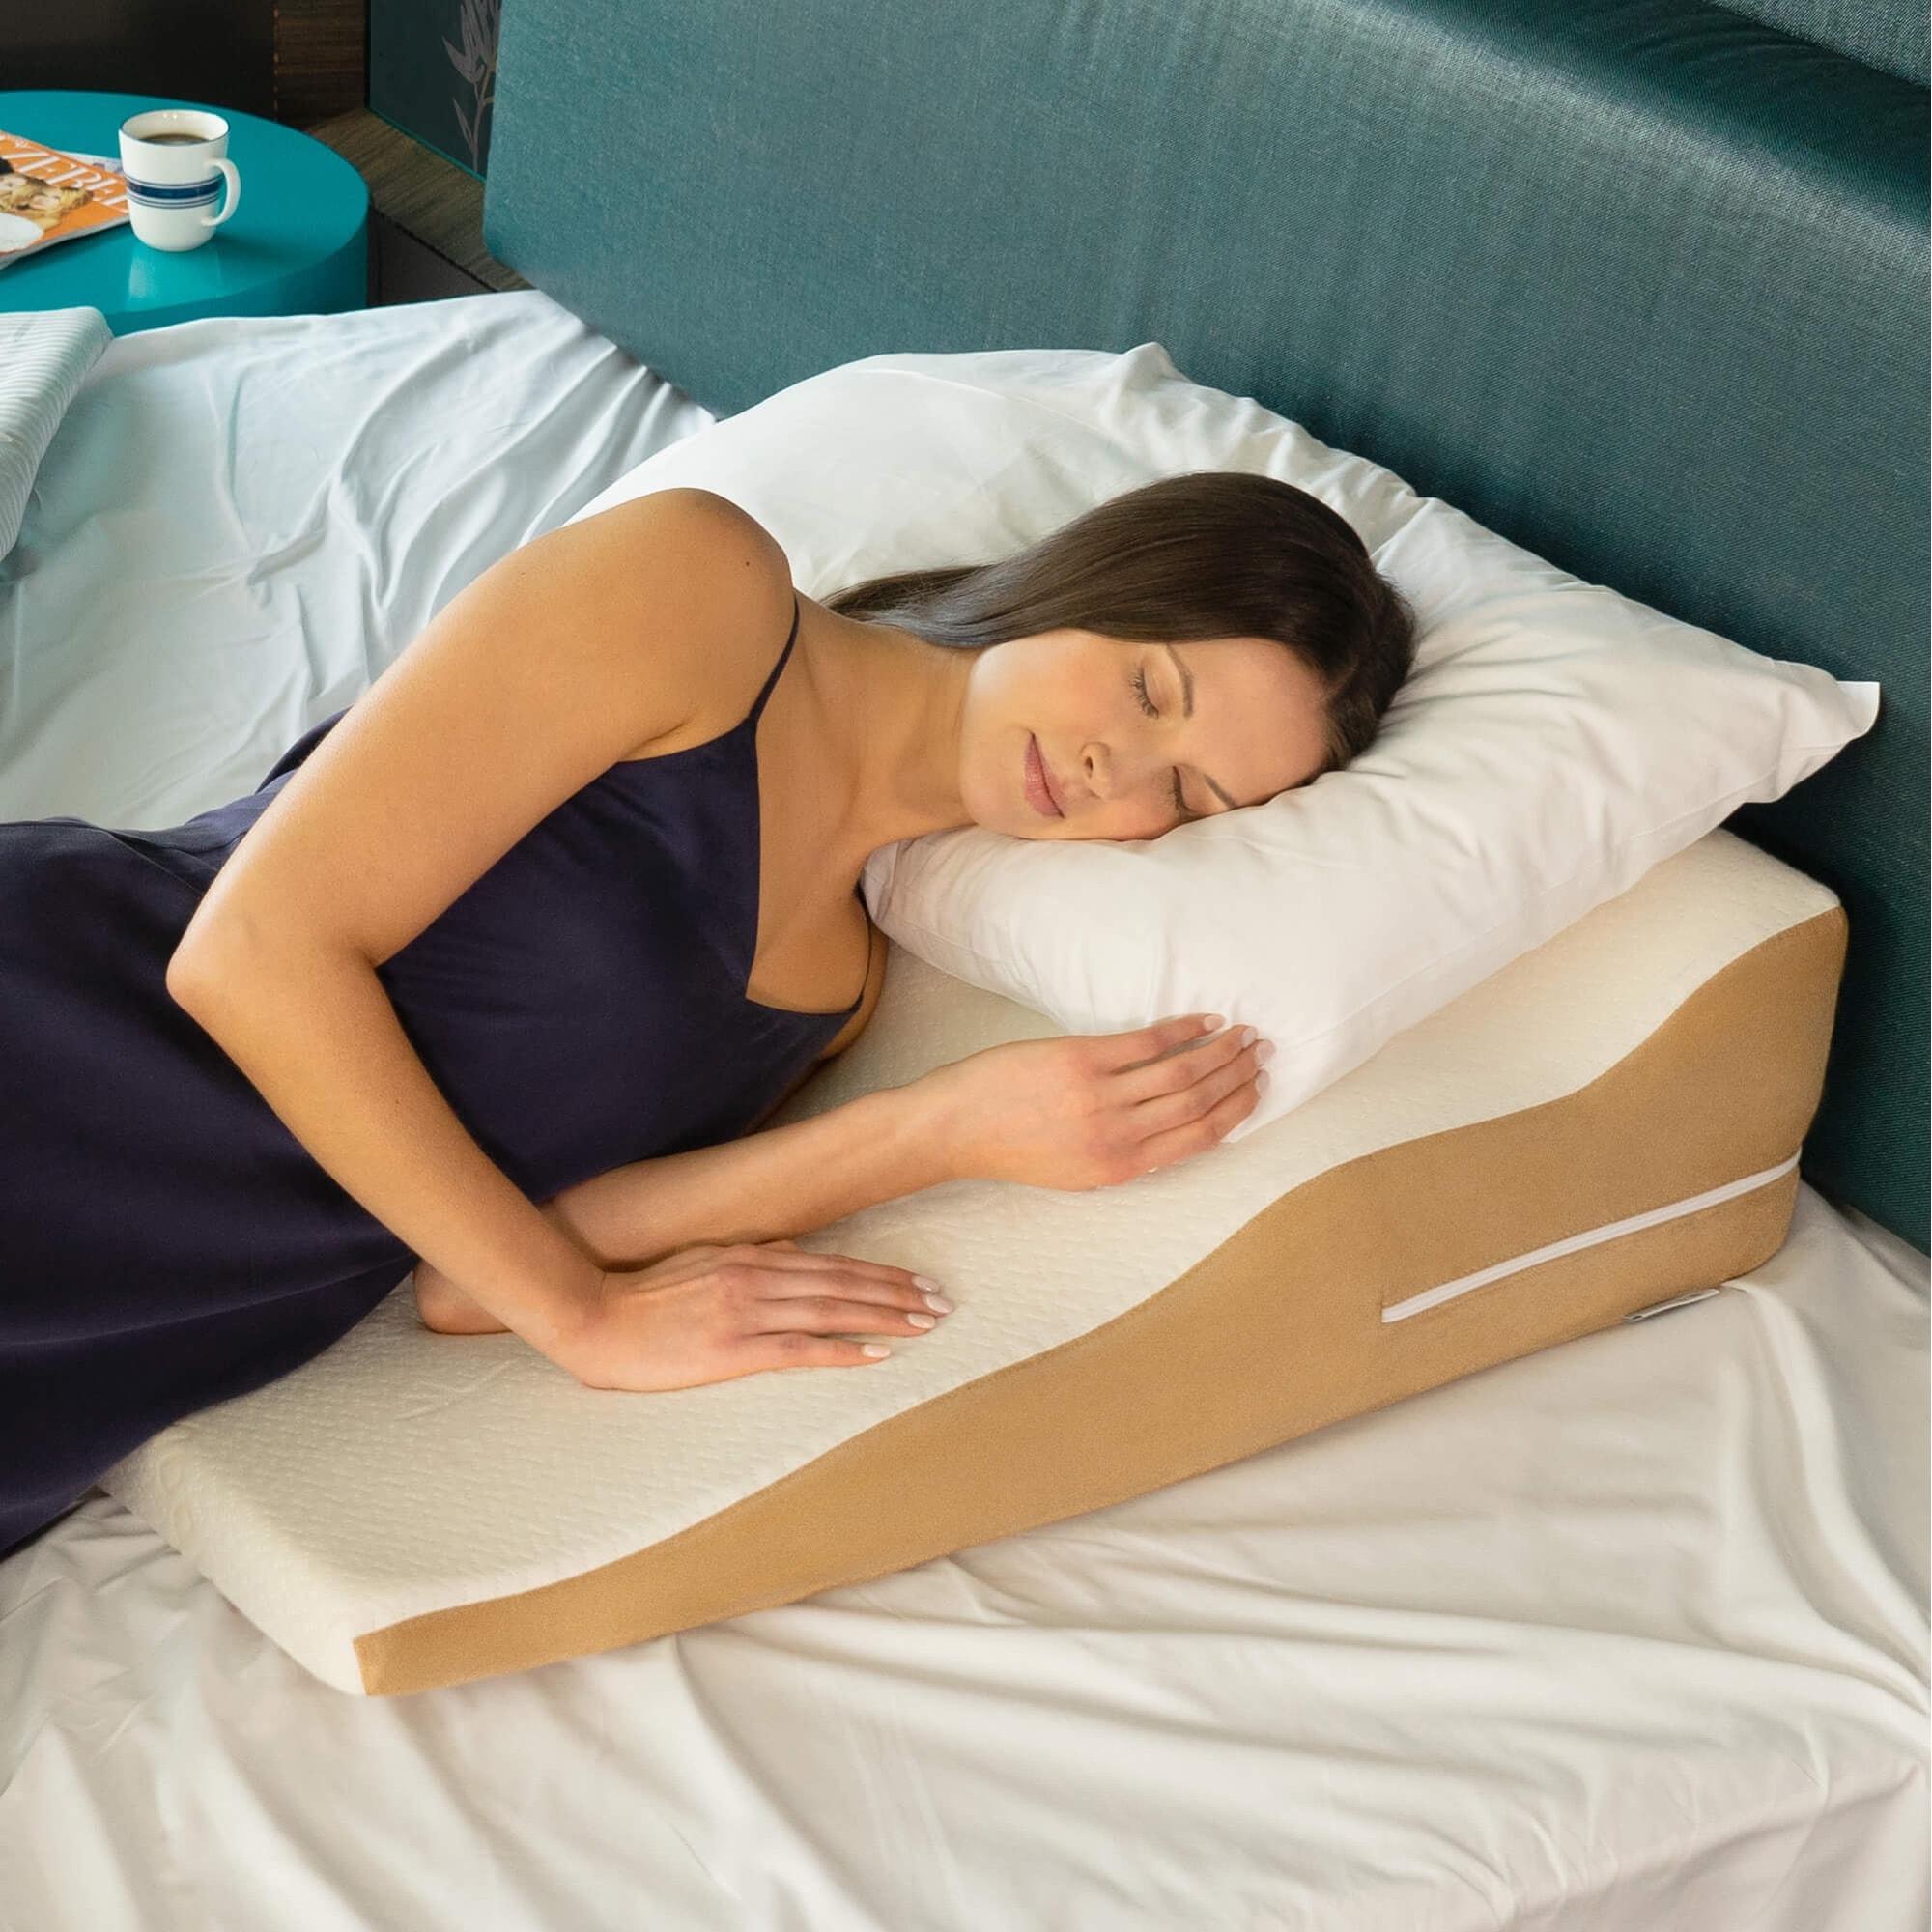 https://ak1.ostkcdn.com/images/products/is/images/direct/593914b8378703aeddd7b5ec2921862ad83217f6/Avana-Contoured-Support-Memory-Foam-Wedge-Pillow.jpg